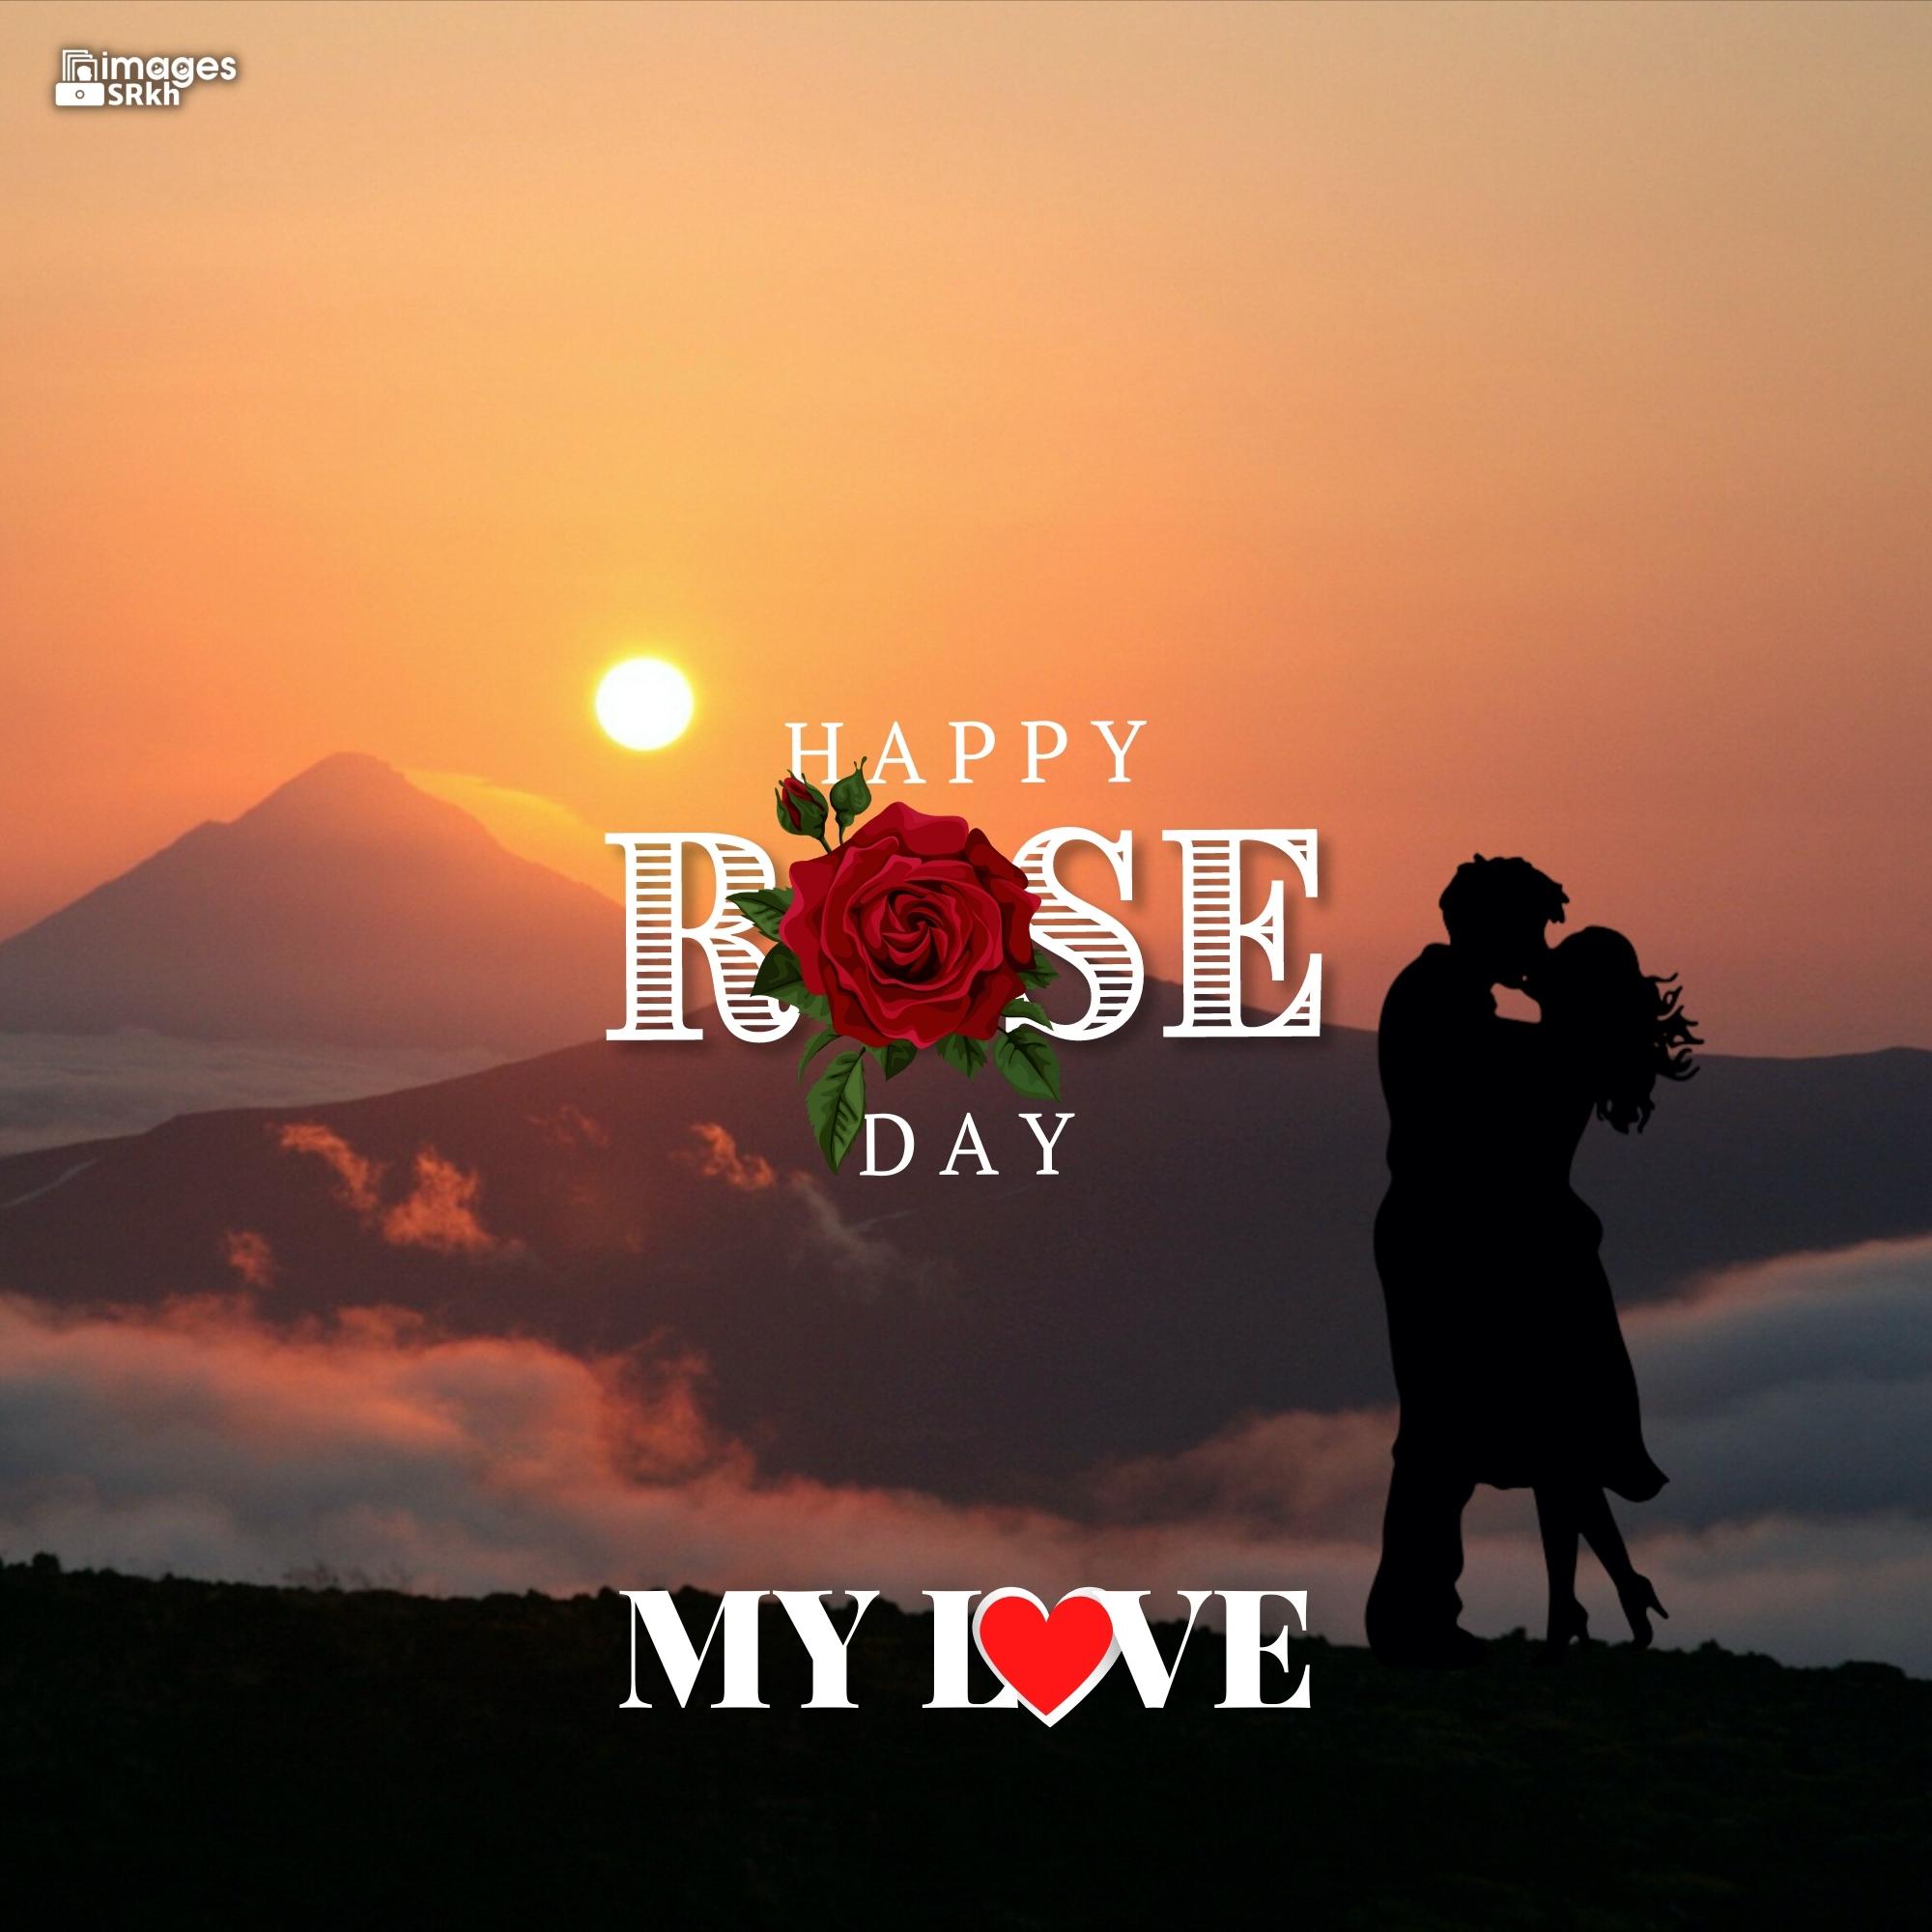 Happy Rose Day My Love (10) | HD IMAGES